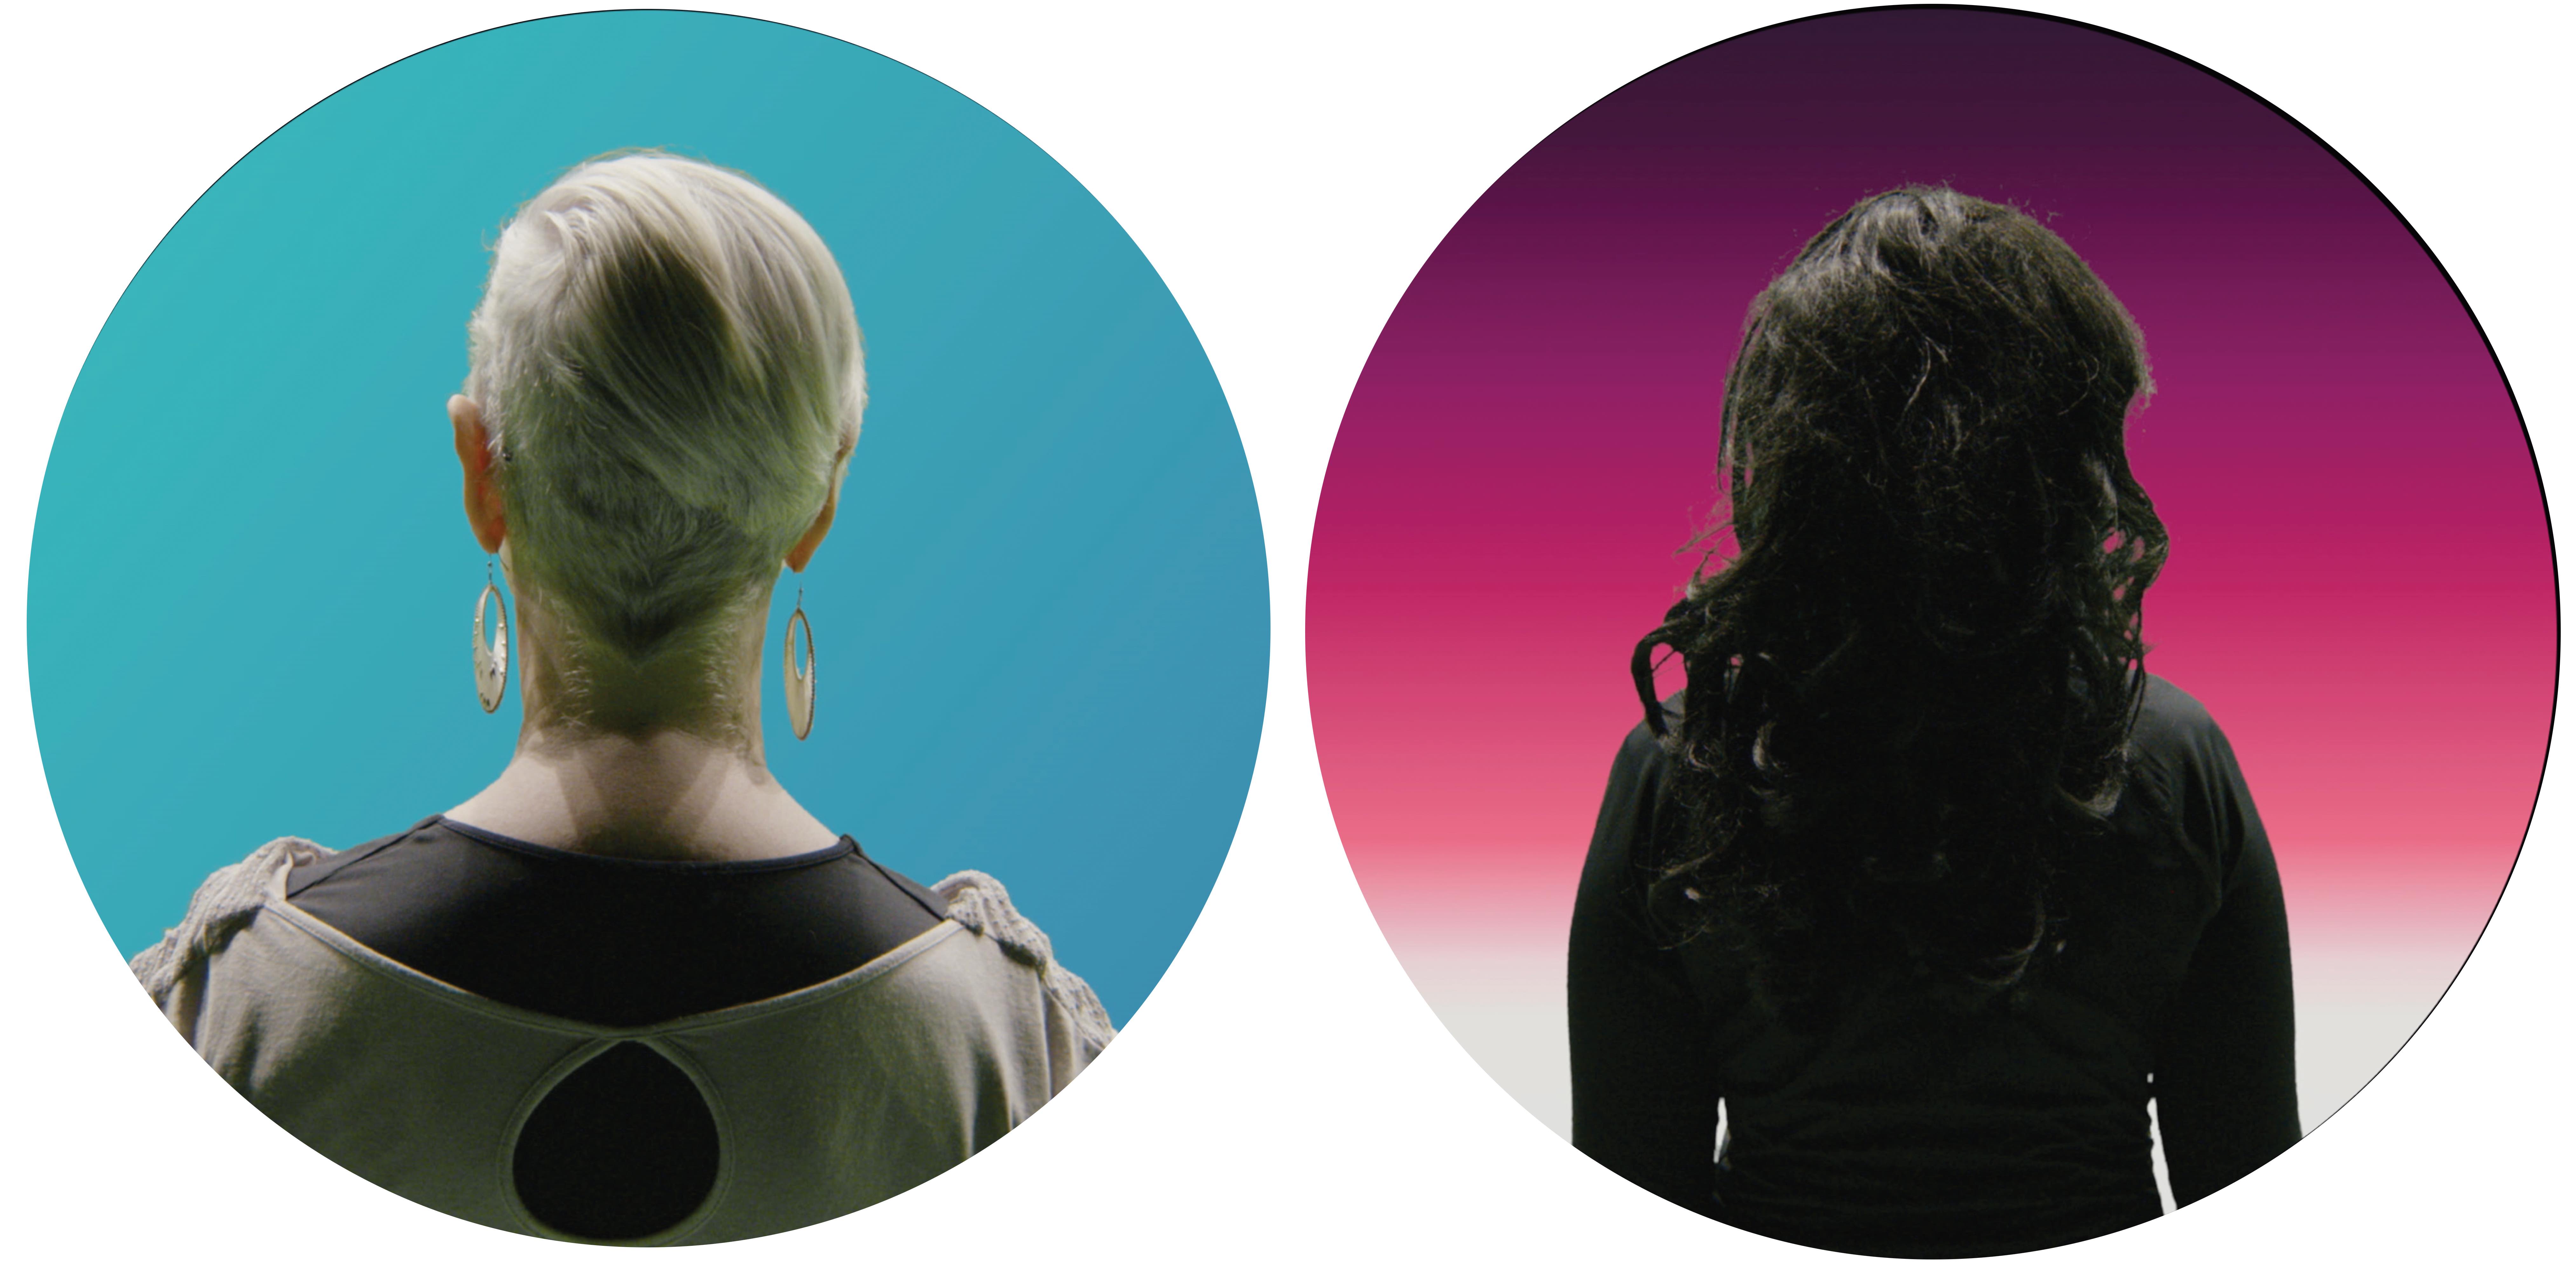 Two women from behind, one with short blonde hair and one with long brunette hair